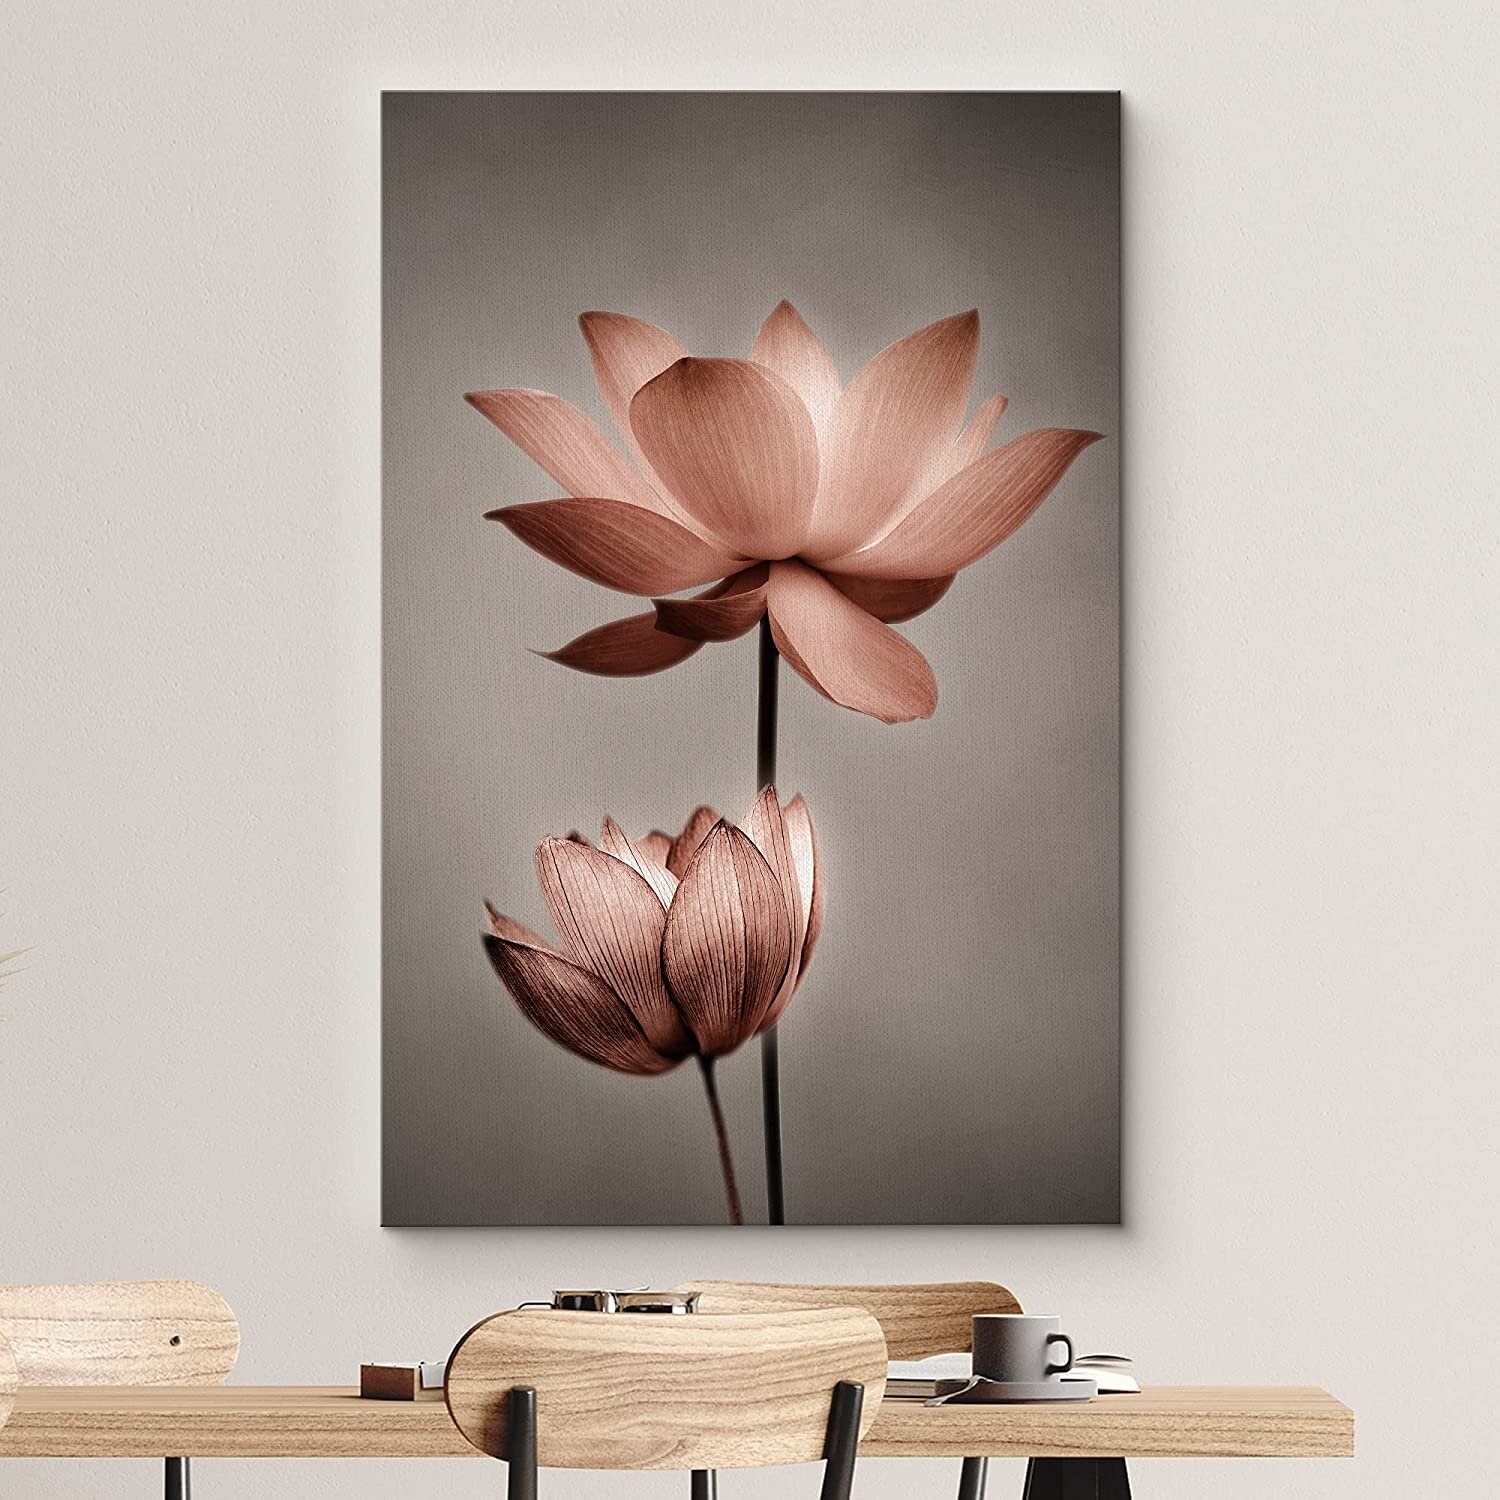 Velvet Coloring Posters: Modern Floral Frameable Wall Art a book